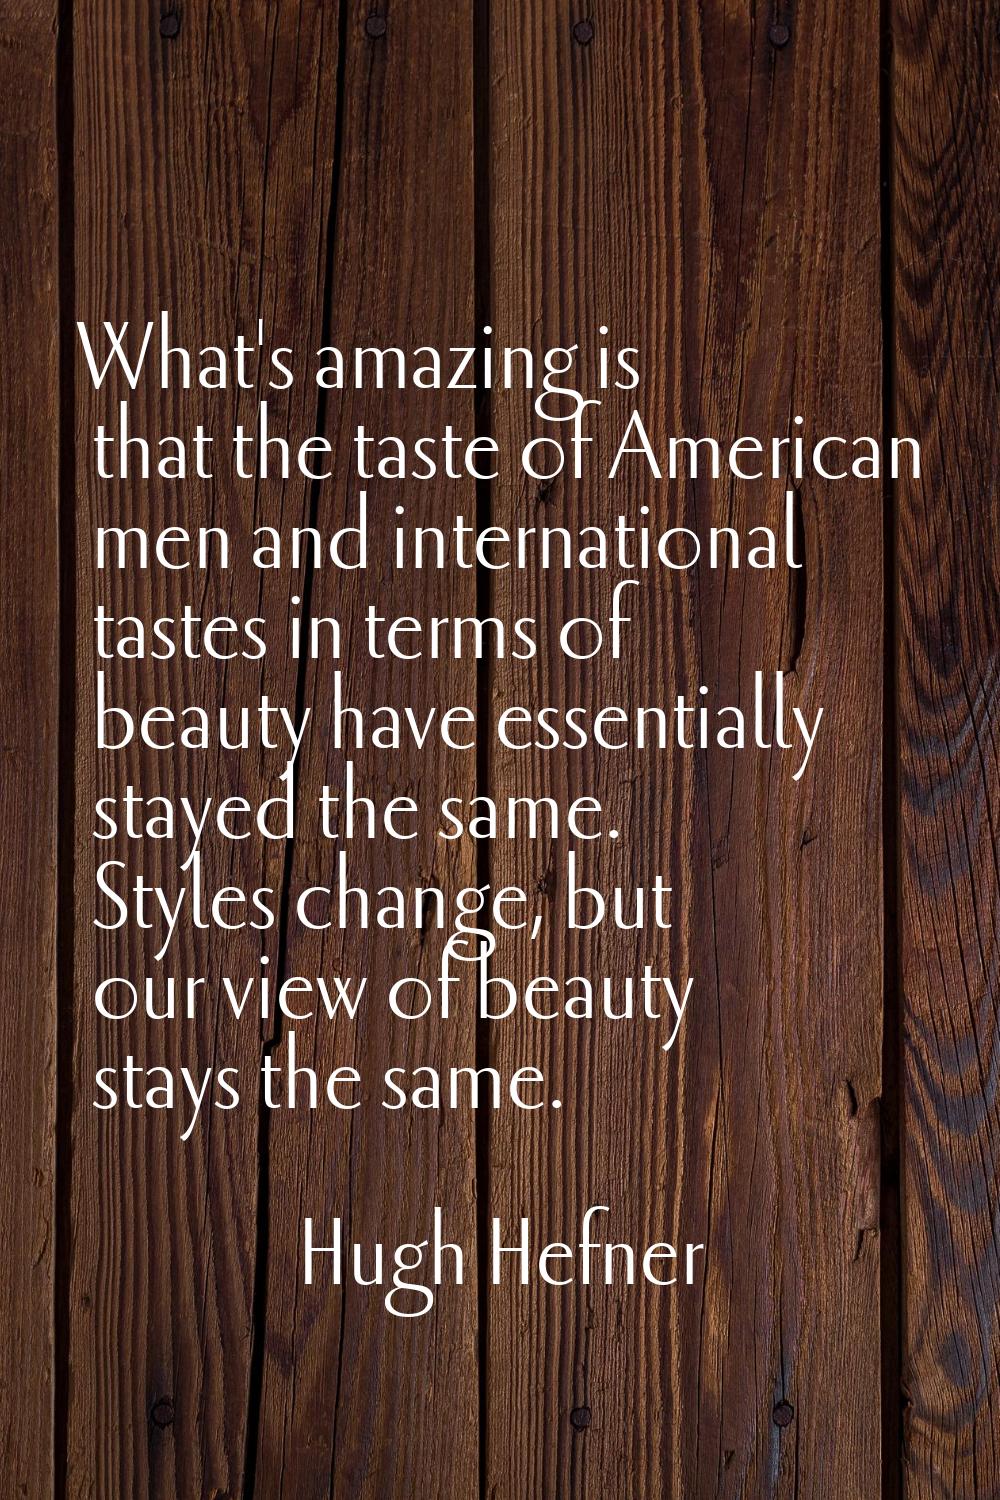 What's amazing is that the taste of American men and international tastes in terms of beauty have e